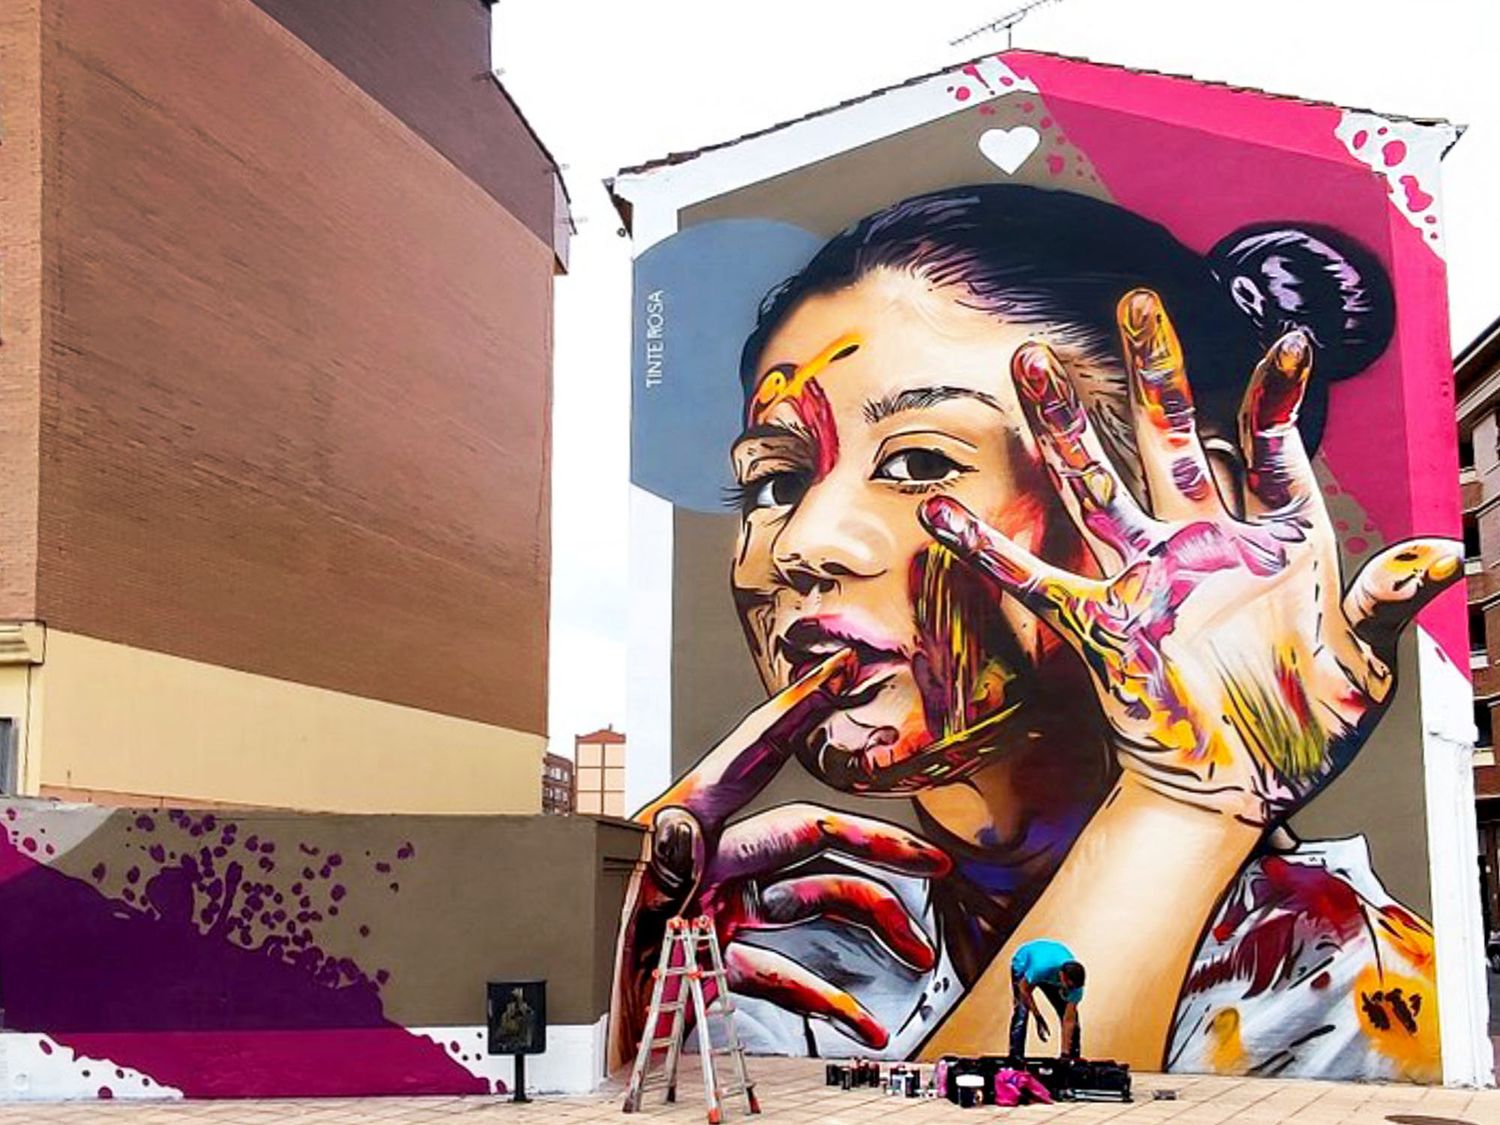 This mural from Tinte Rosa is just one of the many colorful murals he has made in recent times to embellish the street of the city of Burgos, always with selfless and generosity (©Tinte Rosa).